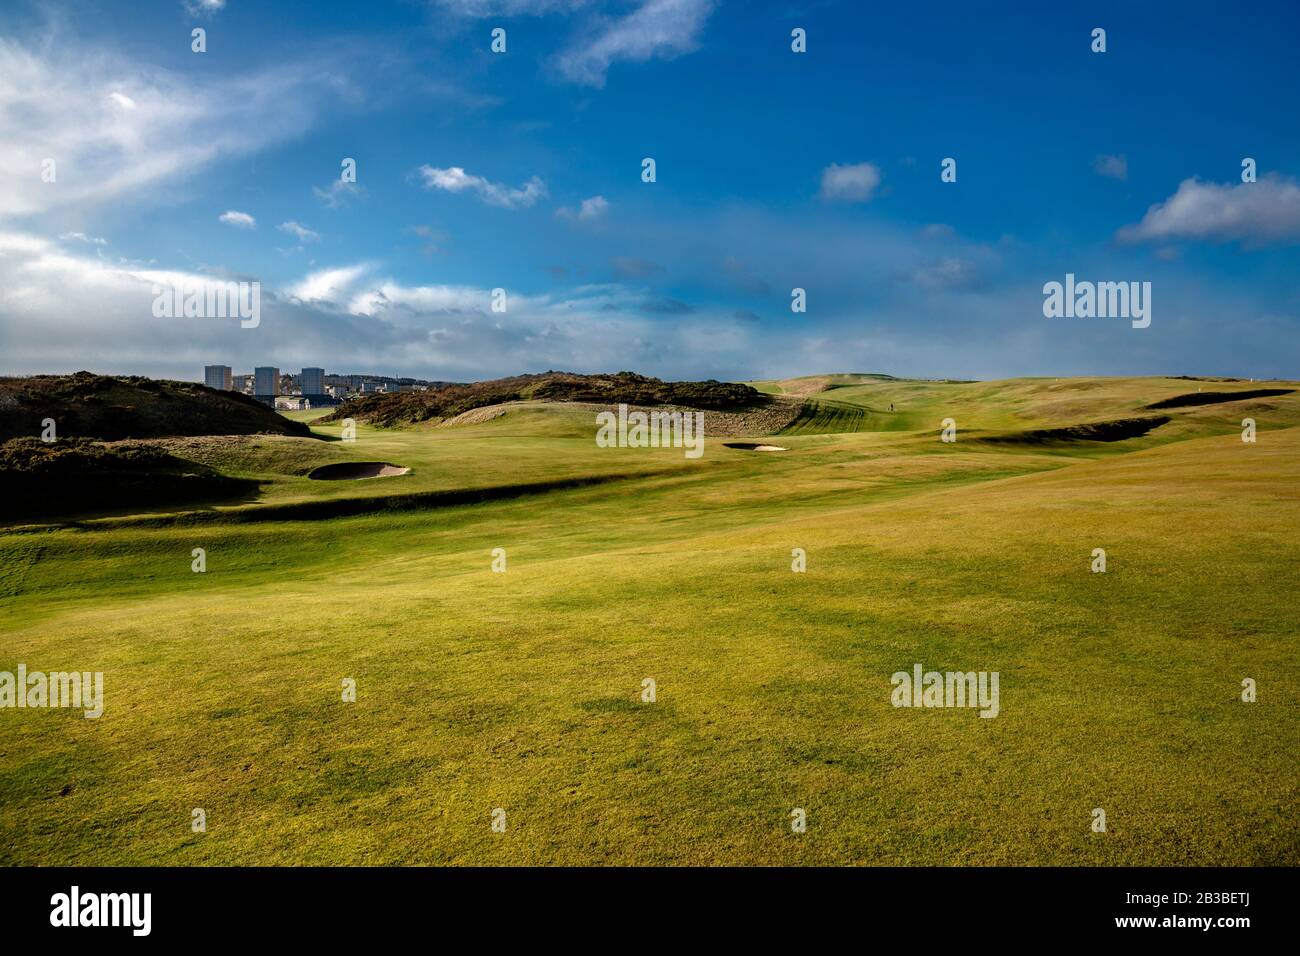 Landscape, Aberdeen Golf Club with clouds and grass field. Nigg Bay, Scotland. Stock Photo